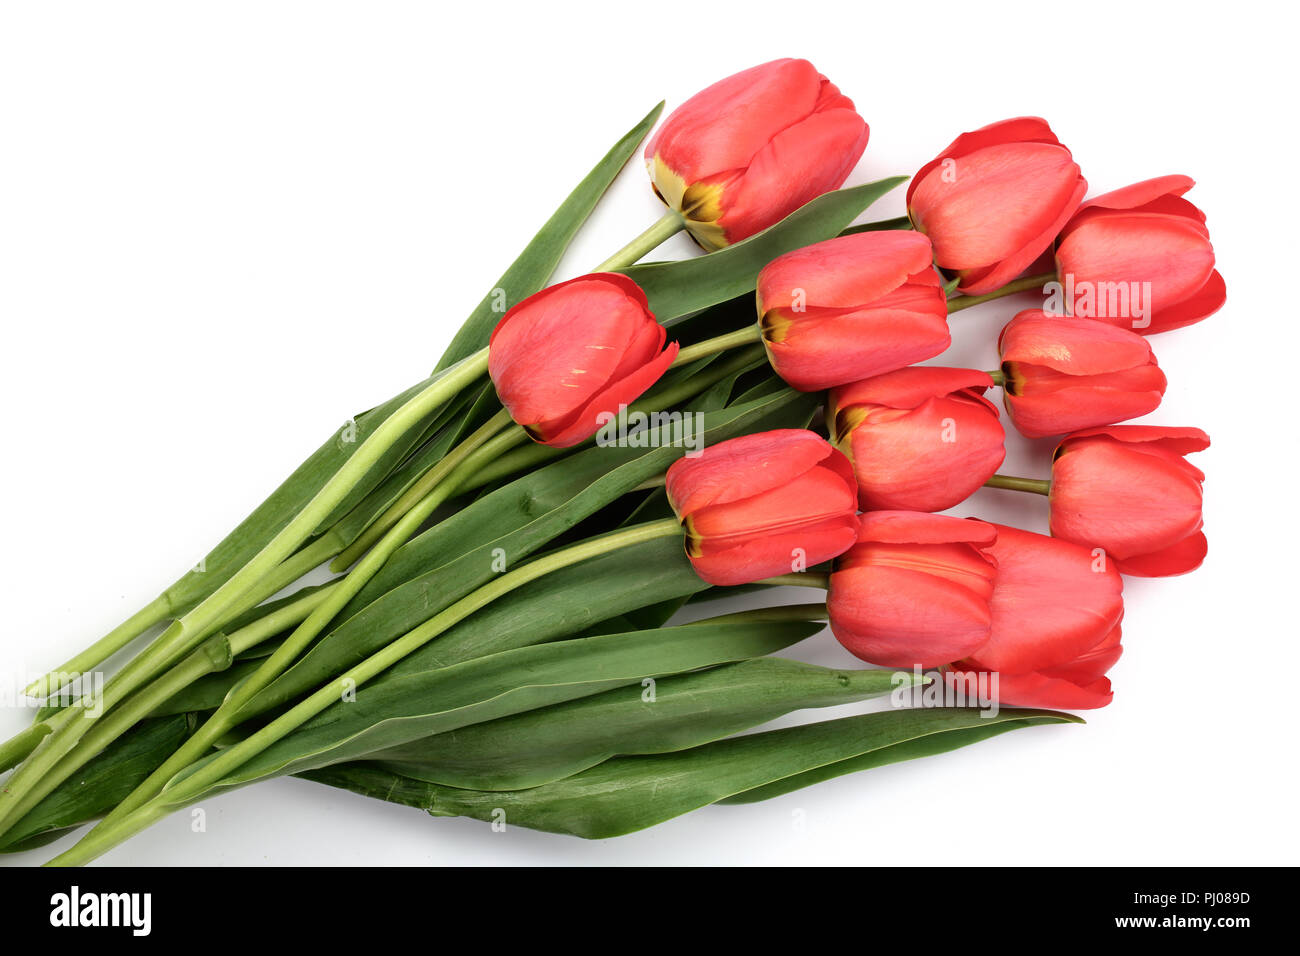 red tulips isolated on white background. Top view. Flat lay pattern. Stock Photo